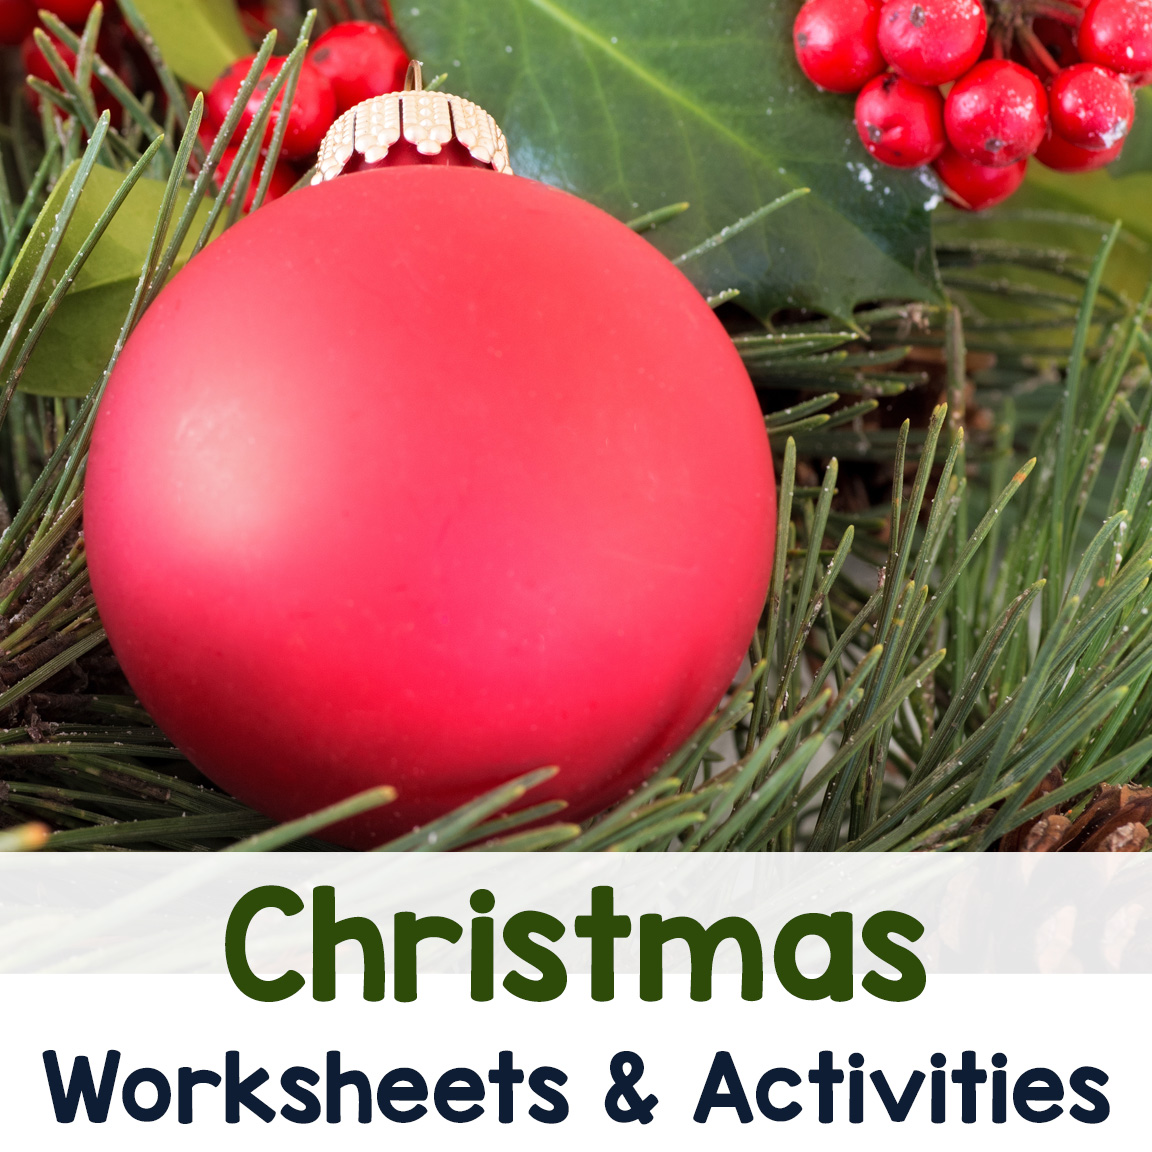 Christmas Worksheets and Activities